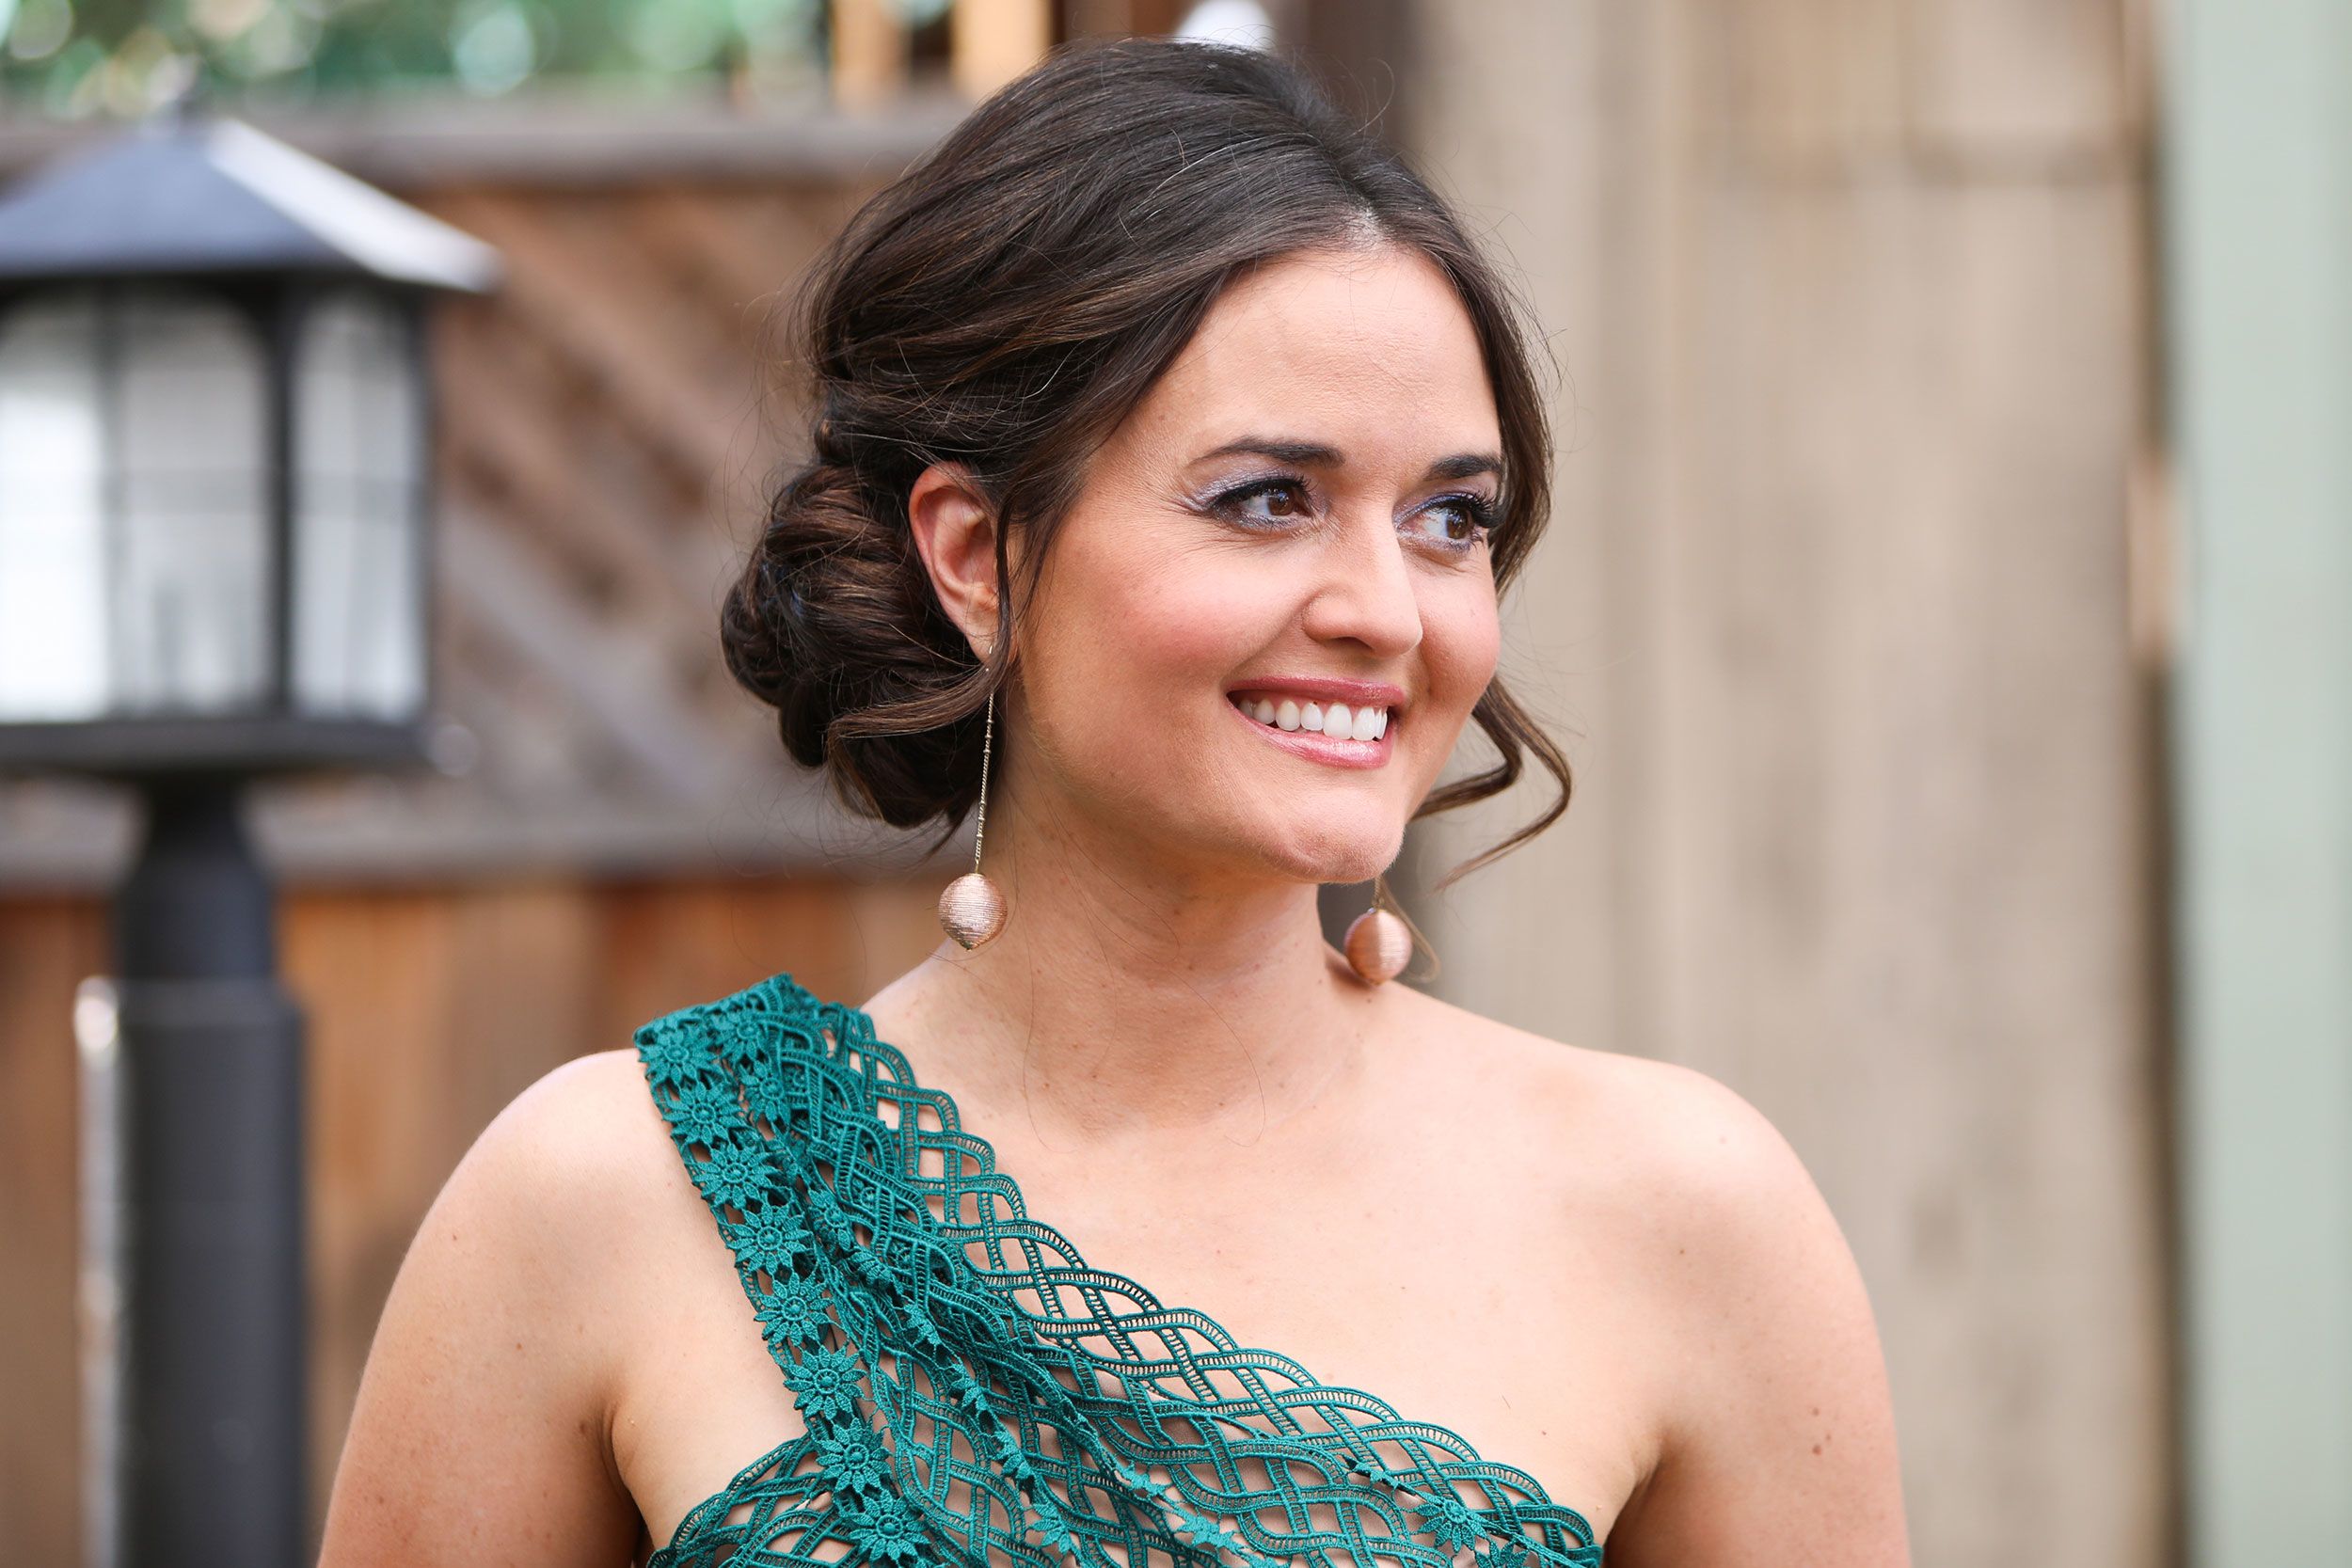 Danica Mckellar Xxxx Videos - Danica McKellar of 'The Wonder Years' explains why she became a  mathematician and stopped acting | CNN